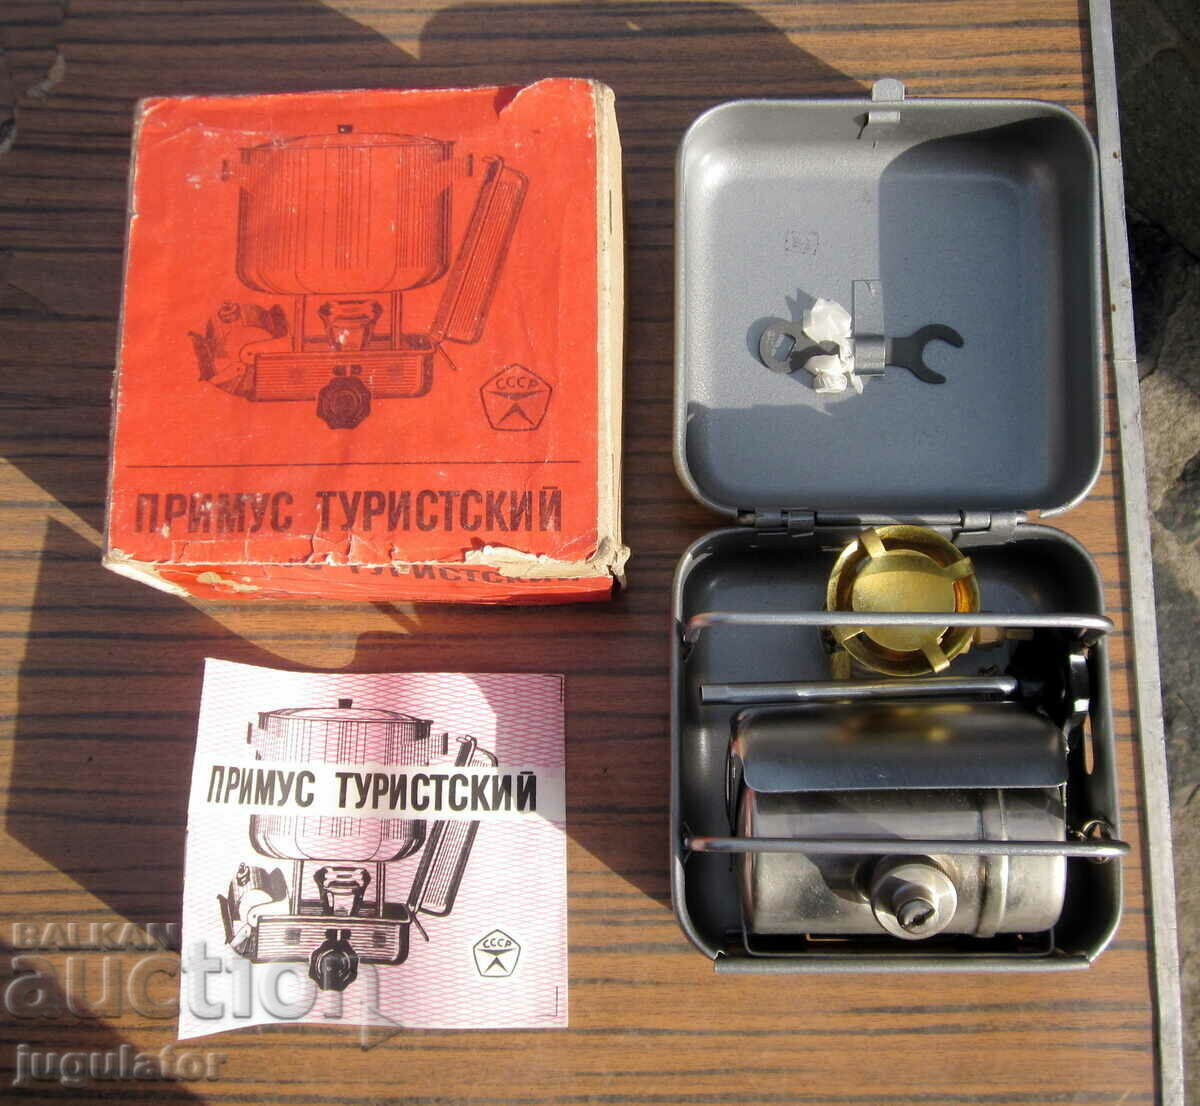 Russian Primus tourist stove with box and booklet